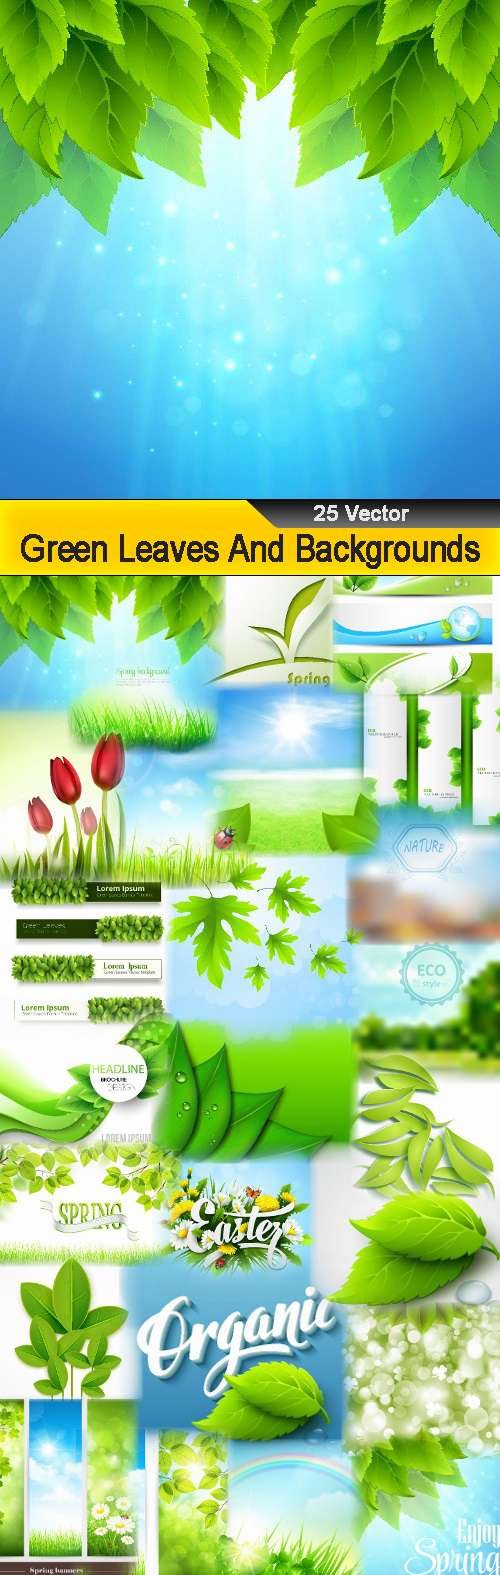 Green Leaves And Backgrounds - 25 Vector